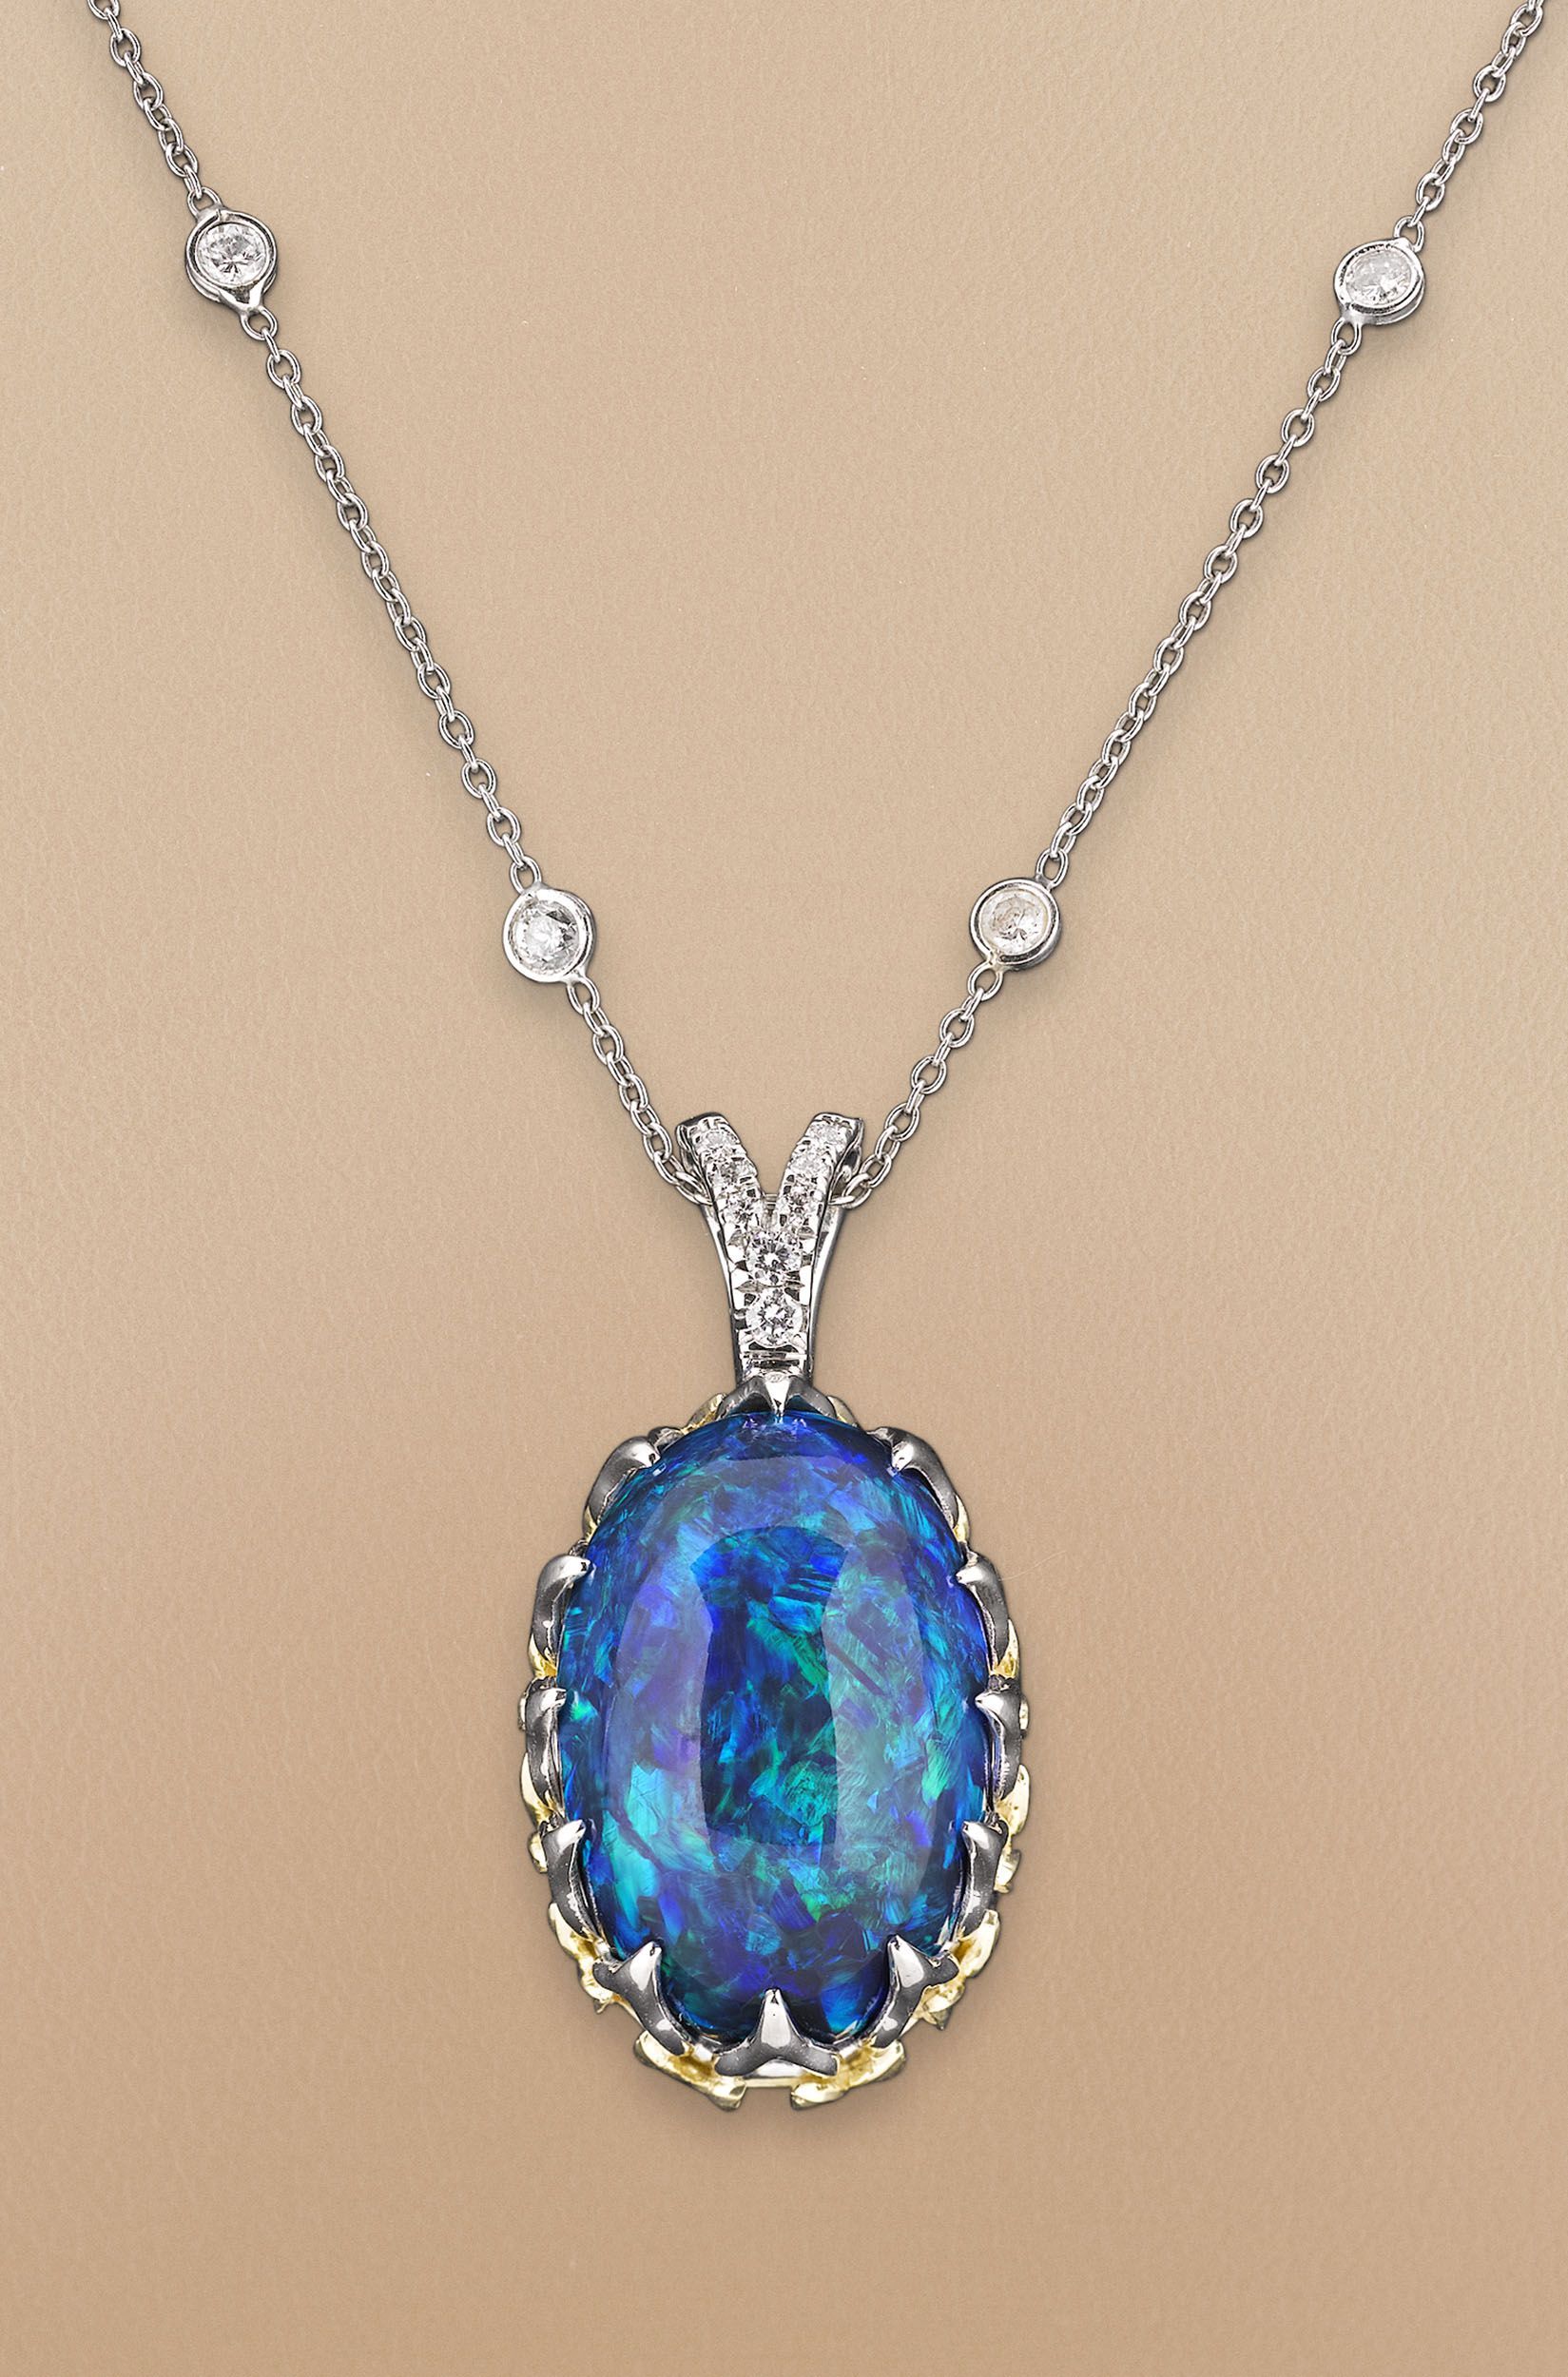 An eye-catching 20.56-carat black opal is the star of this stunning necklace ~ M.S. Rau Antiques